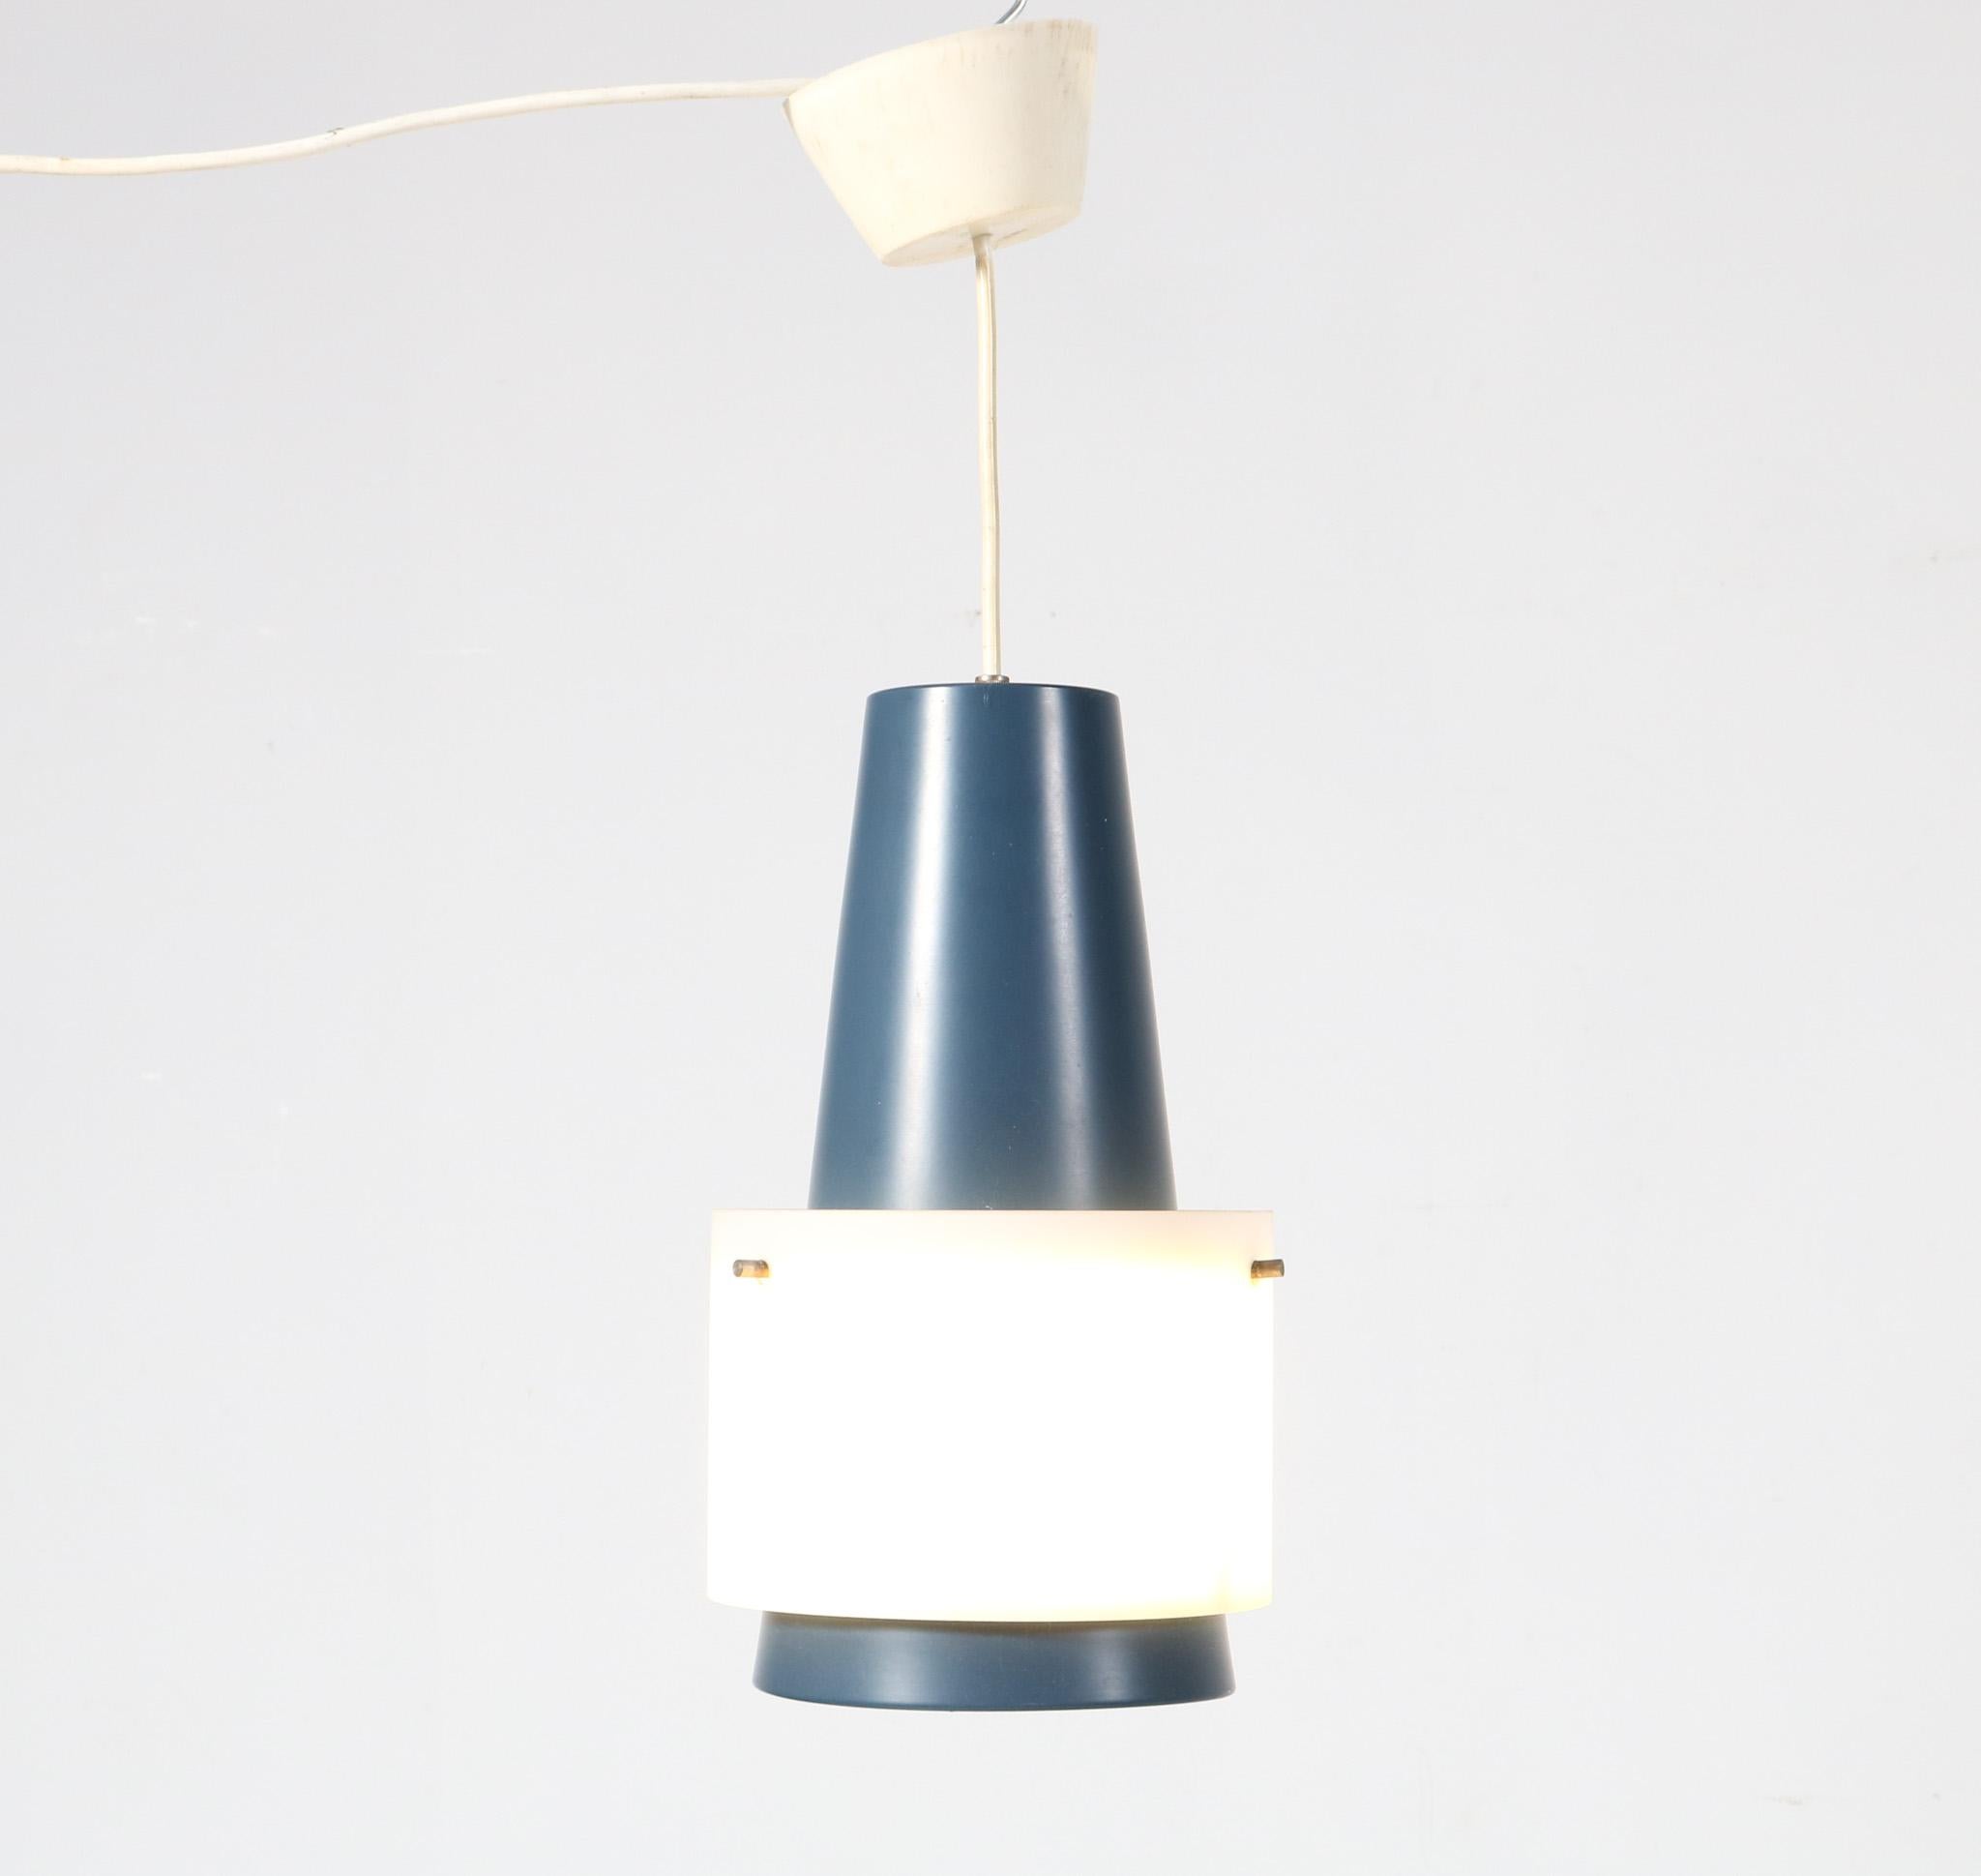 Stunning and rare Mid-Century Modern pendant lamp.
Design by Louis Kalff for Philips.
Striking Dutch design from the 1950s.
Original blue lacquered metal frame with original milk glass shade.
In very good original condition with minor wear